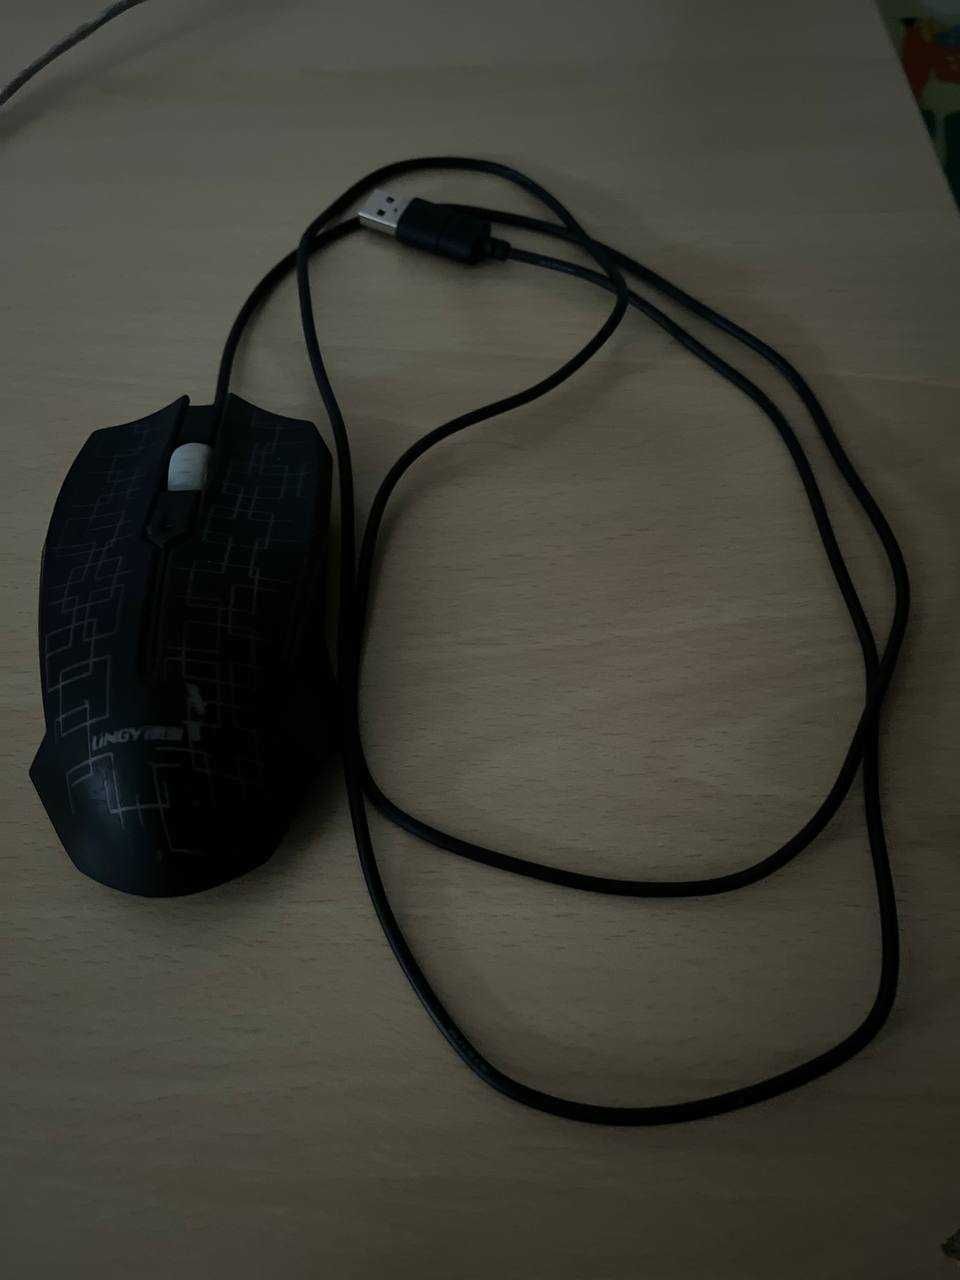 Computer mouse, game mouse